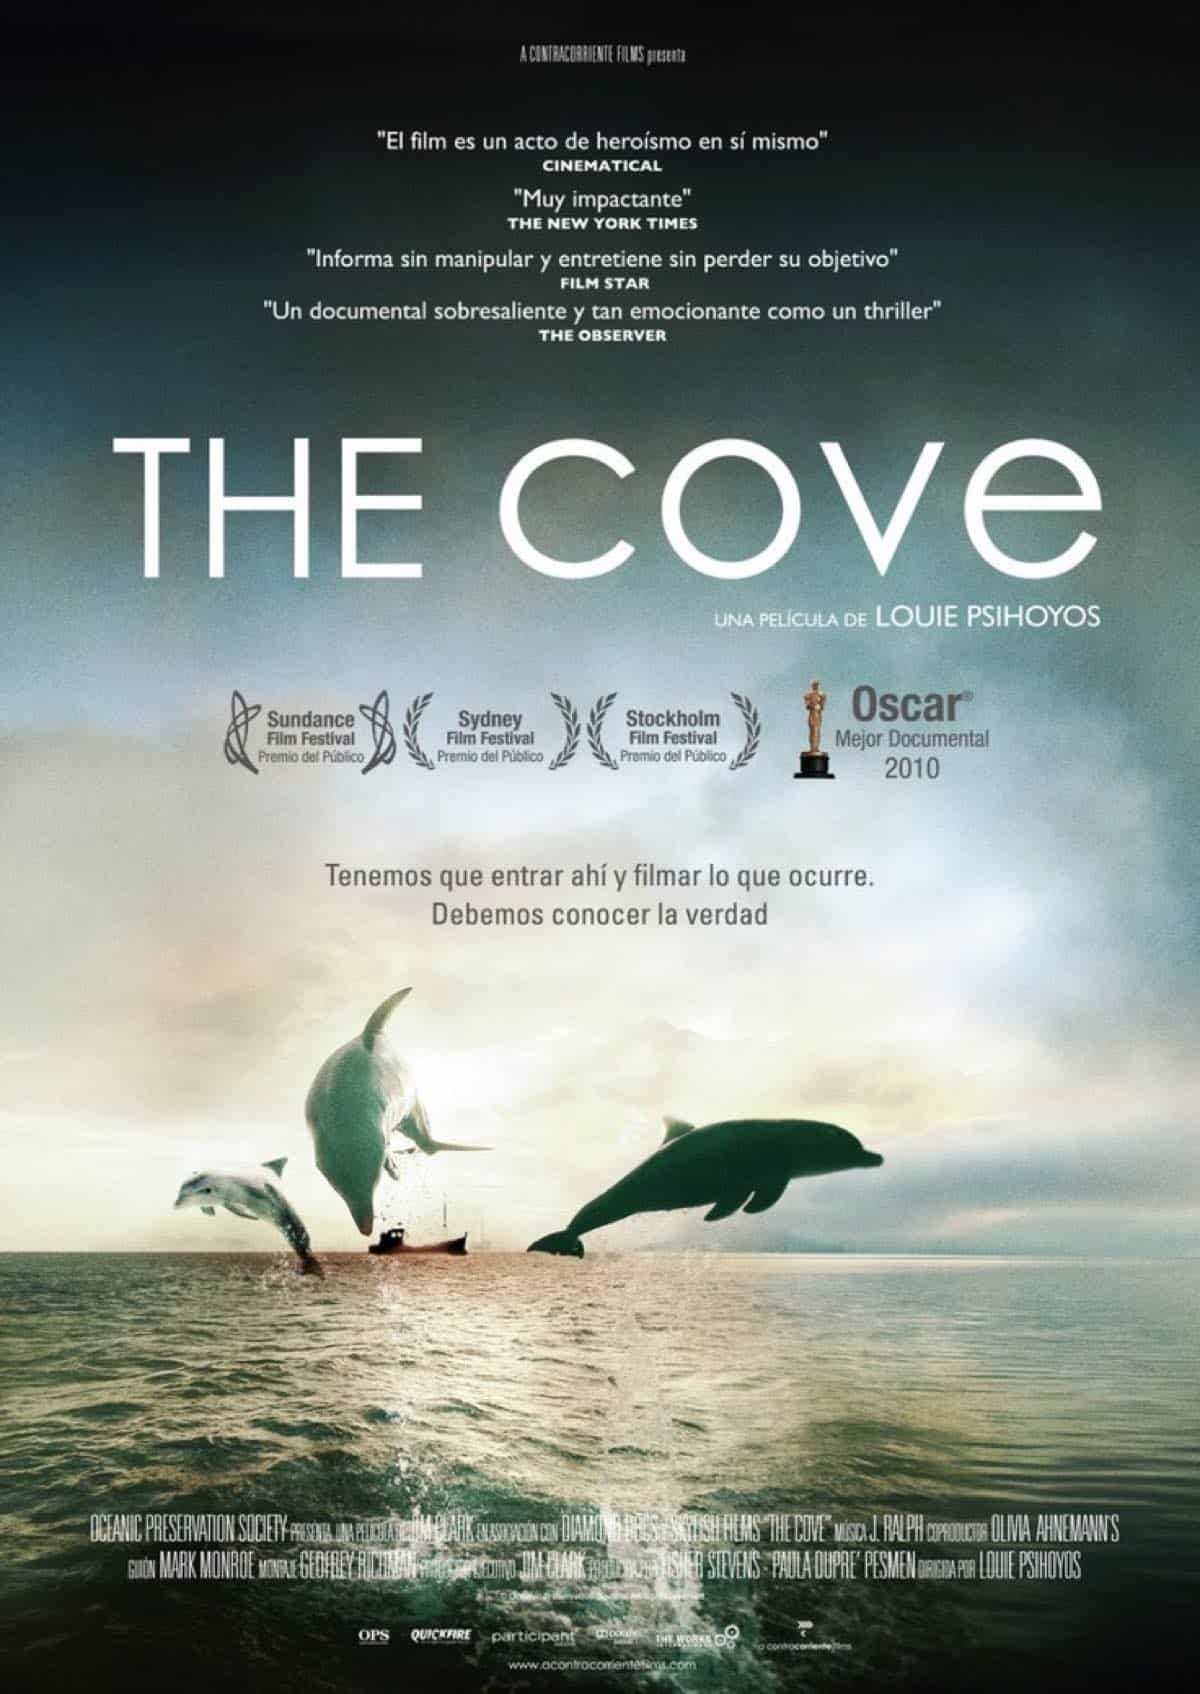 Movie poster for The Cove film about dolphin slaughter in Japan. 